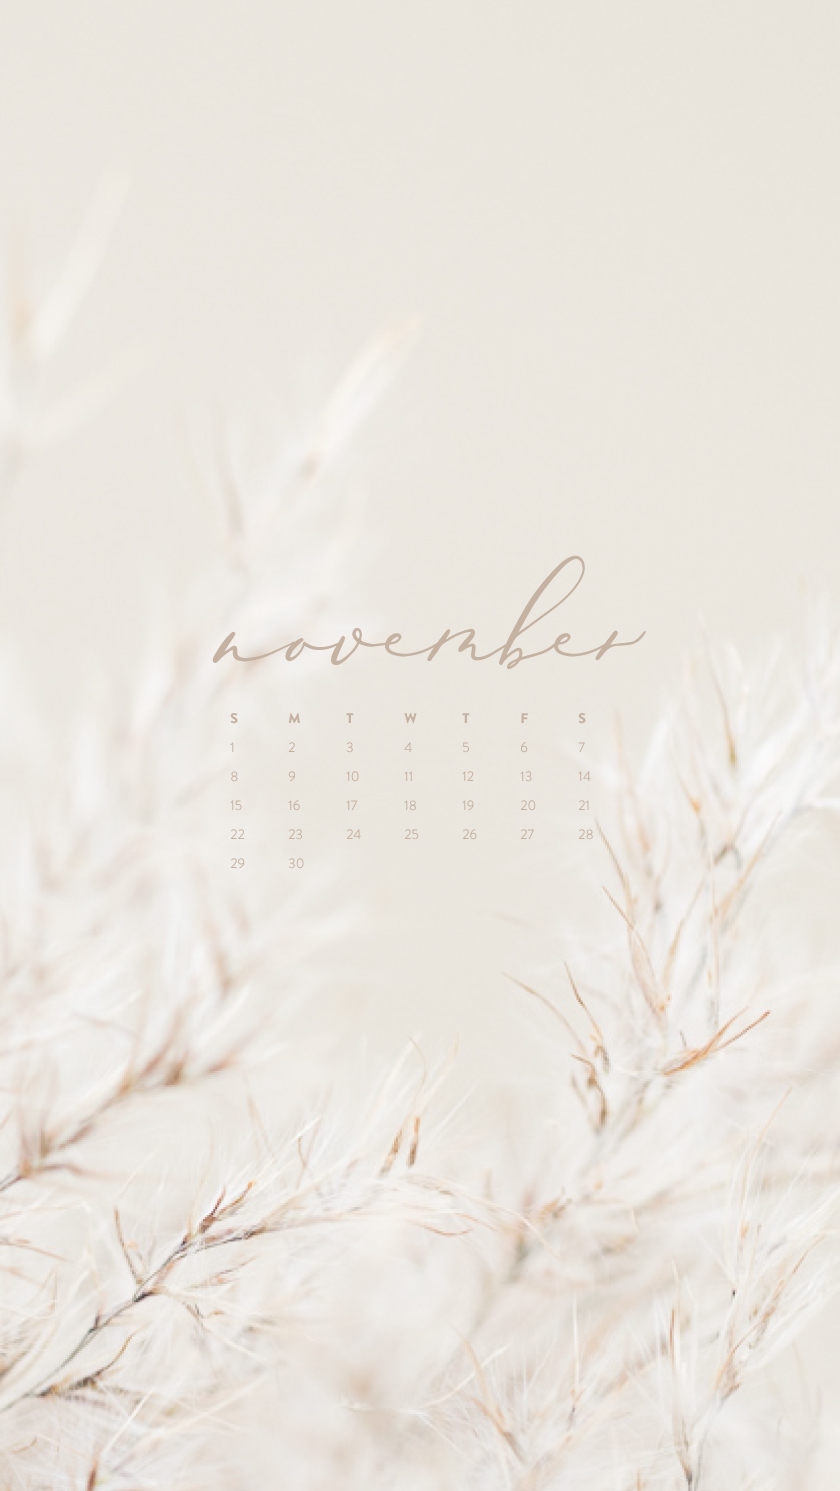 Free Downloadable Tech Backgrounds for November 2021  The Everygirl